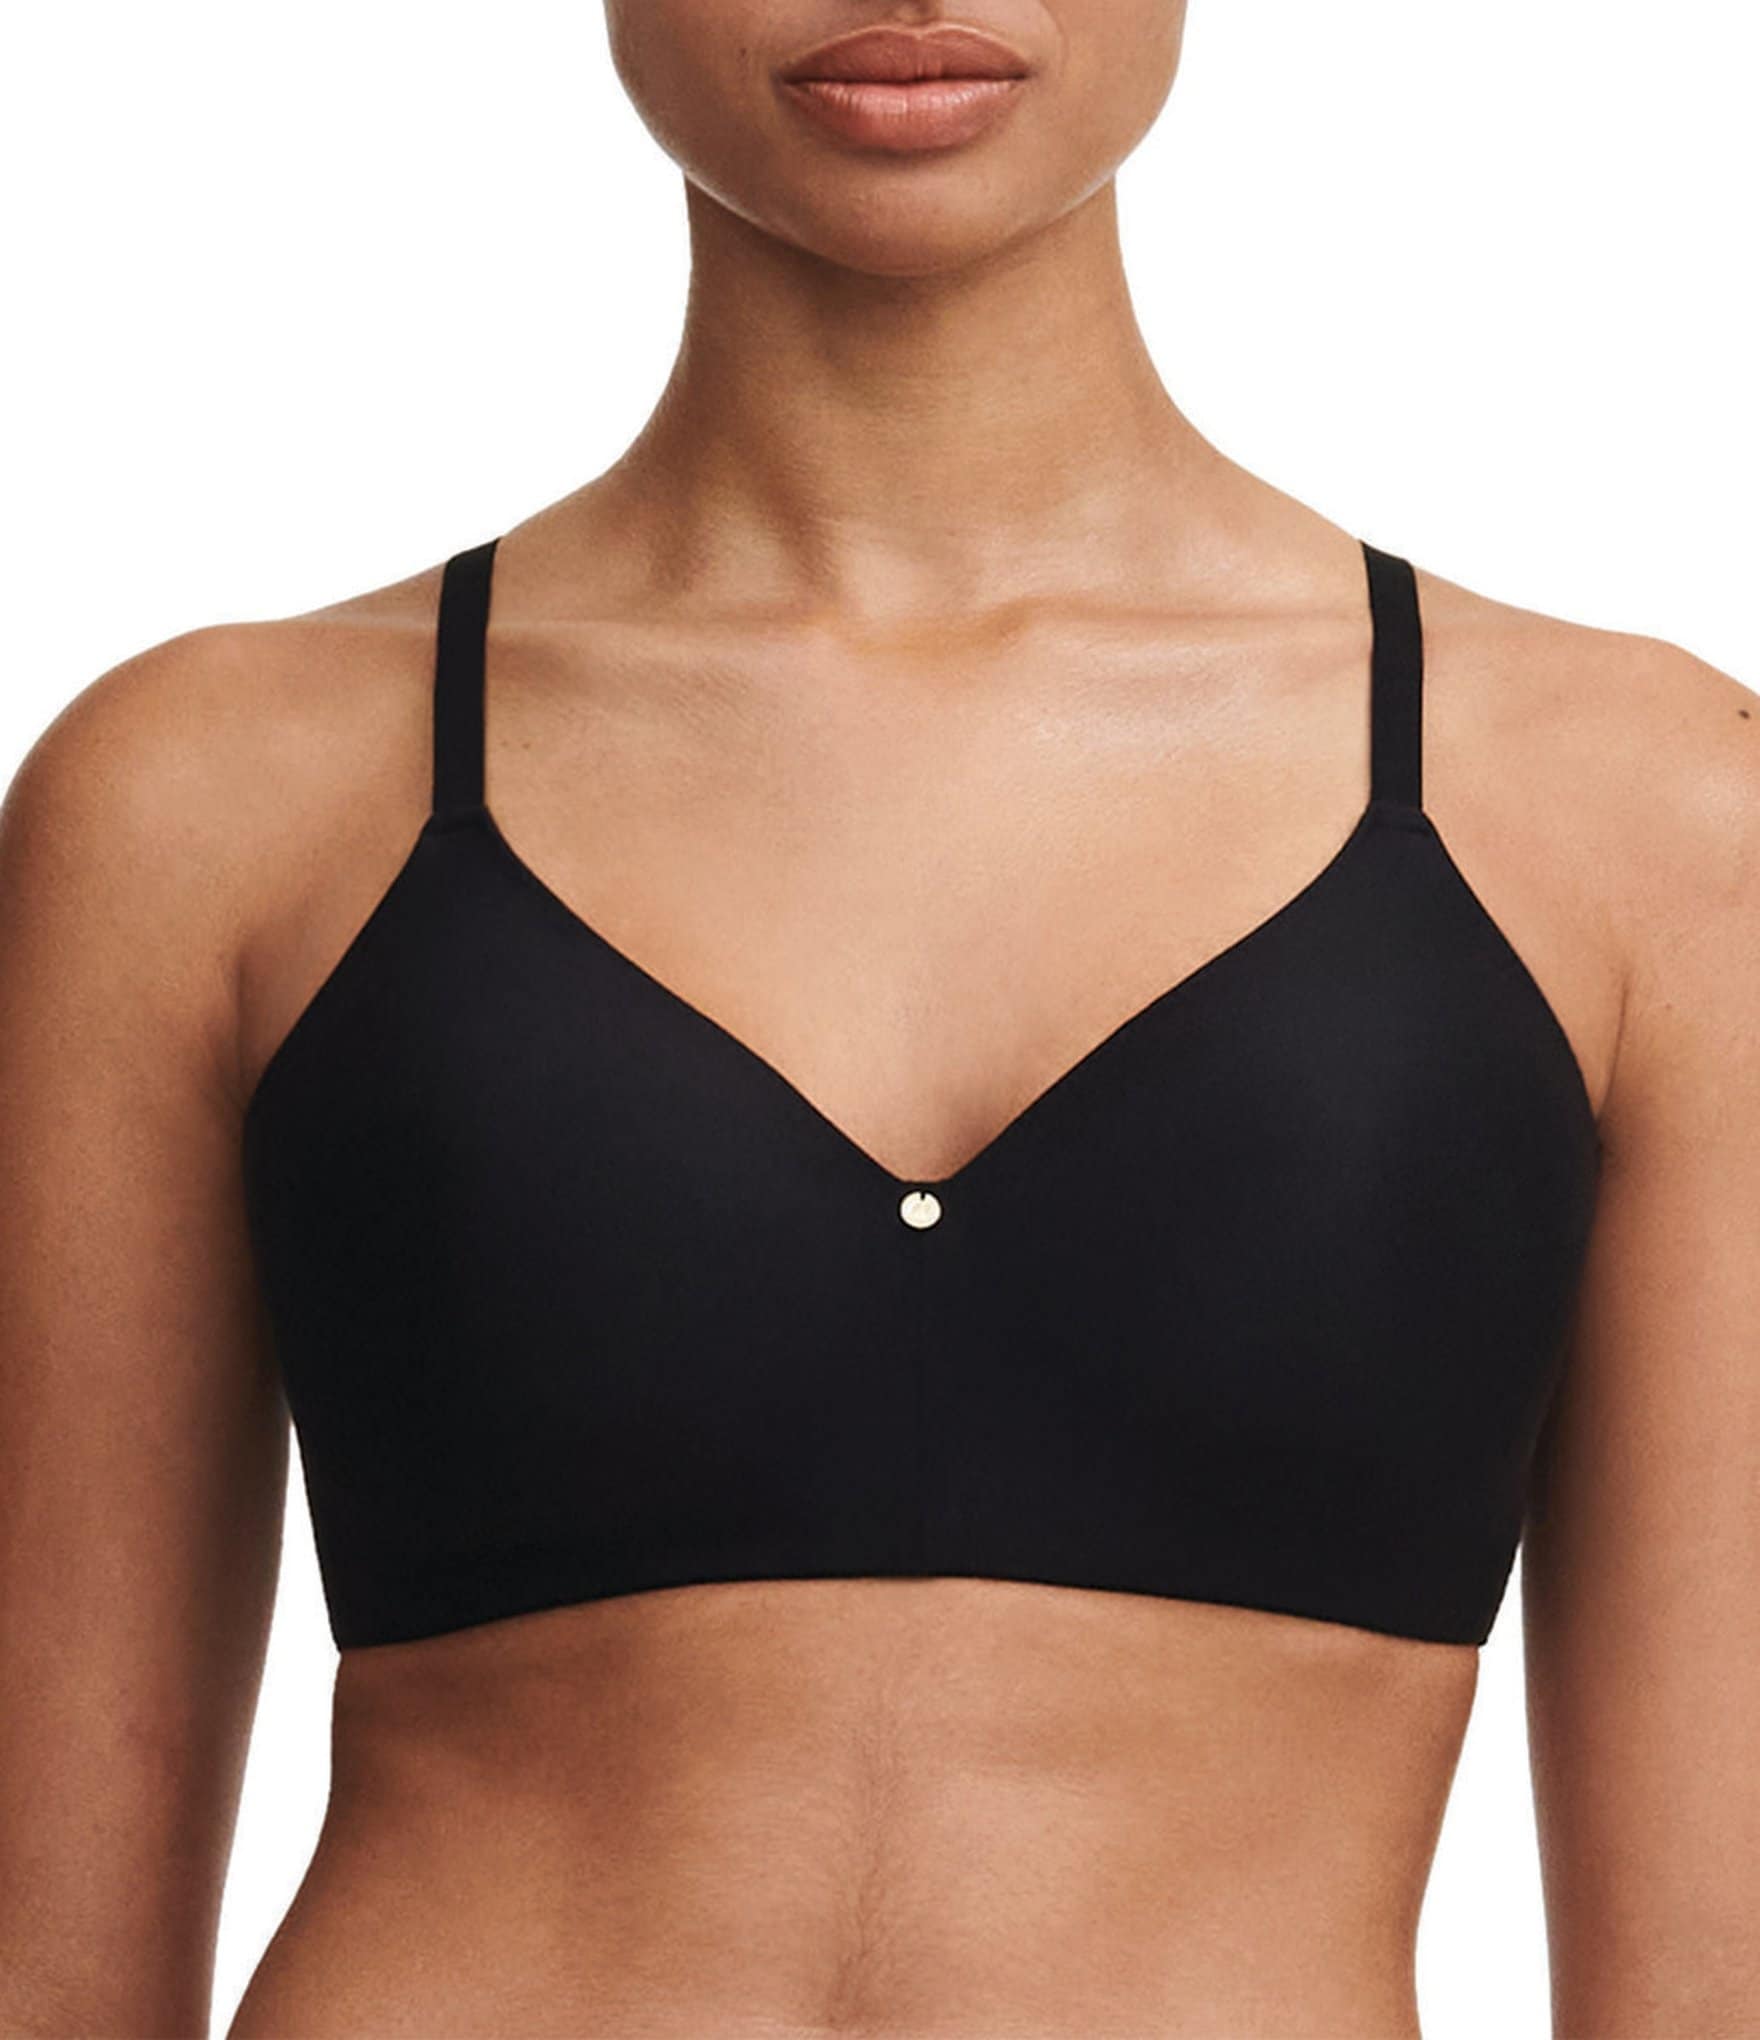 Chantelle Absolute Invisible Wireless Bra, Small